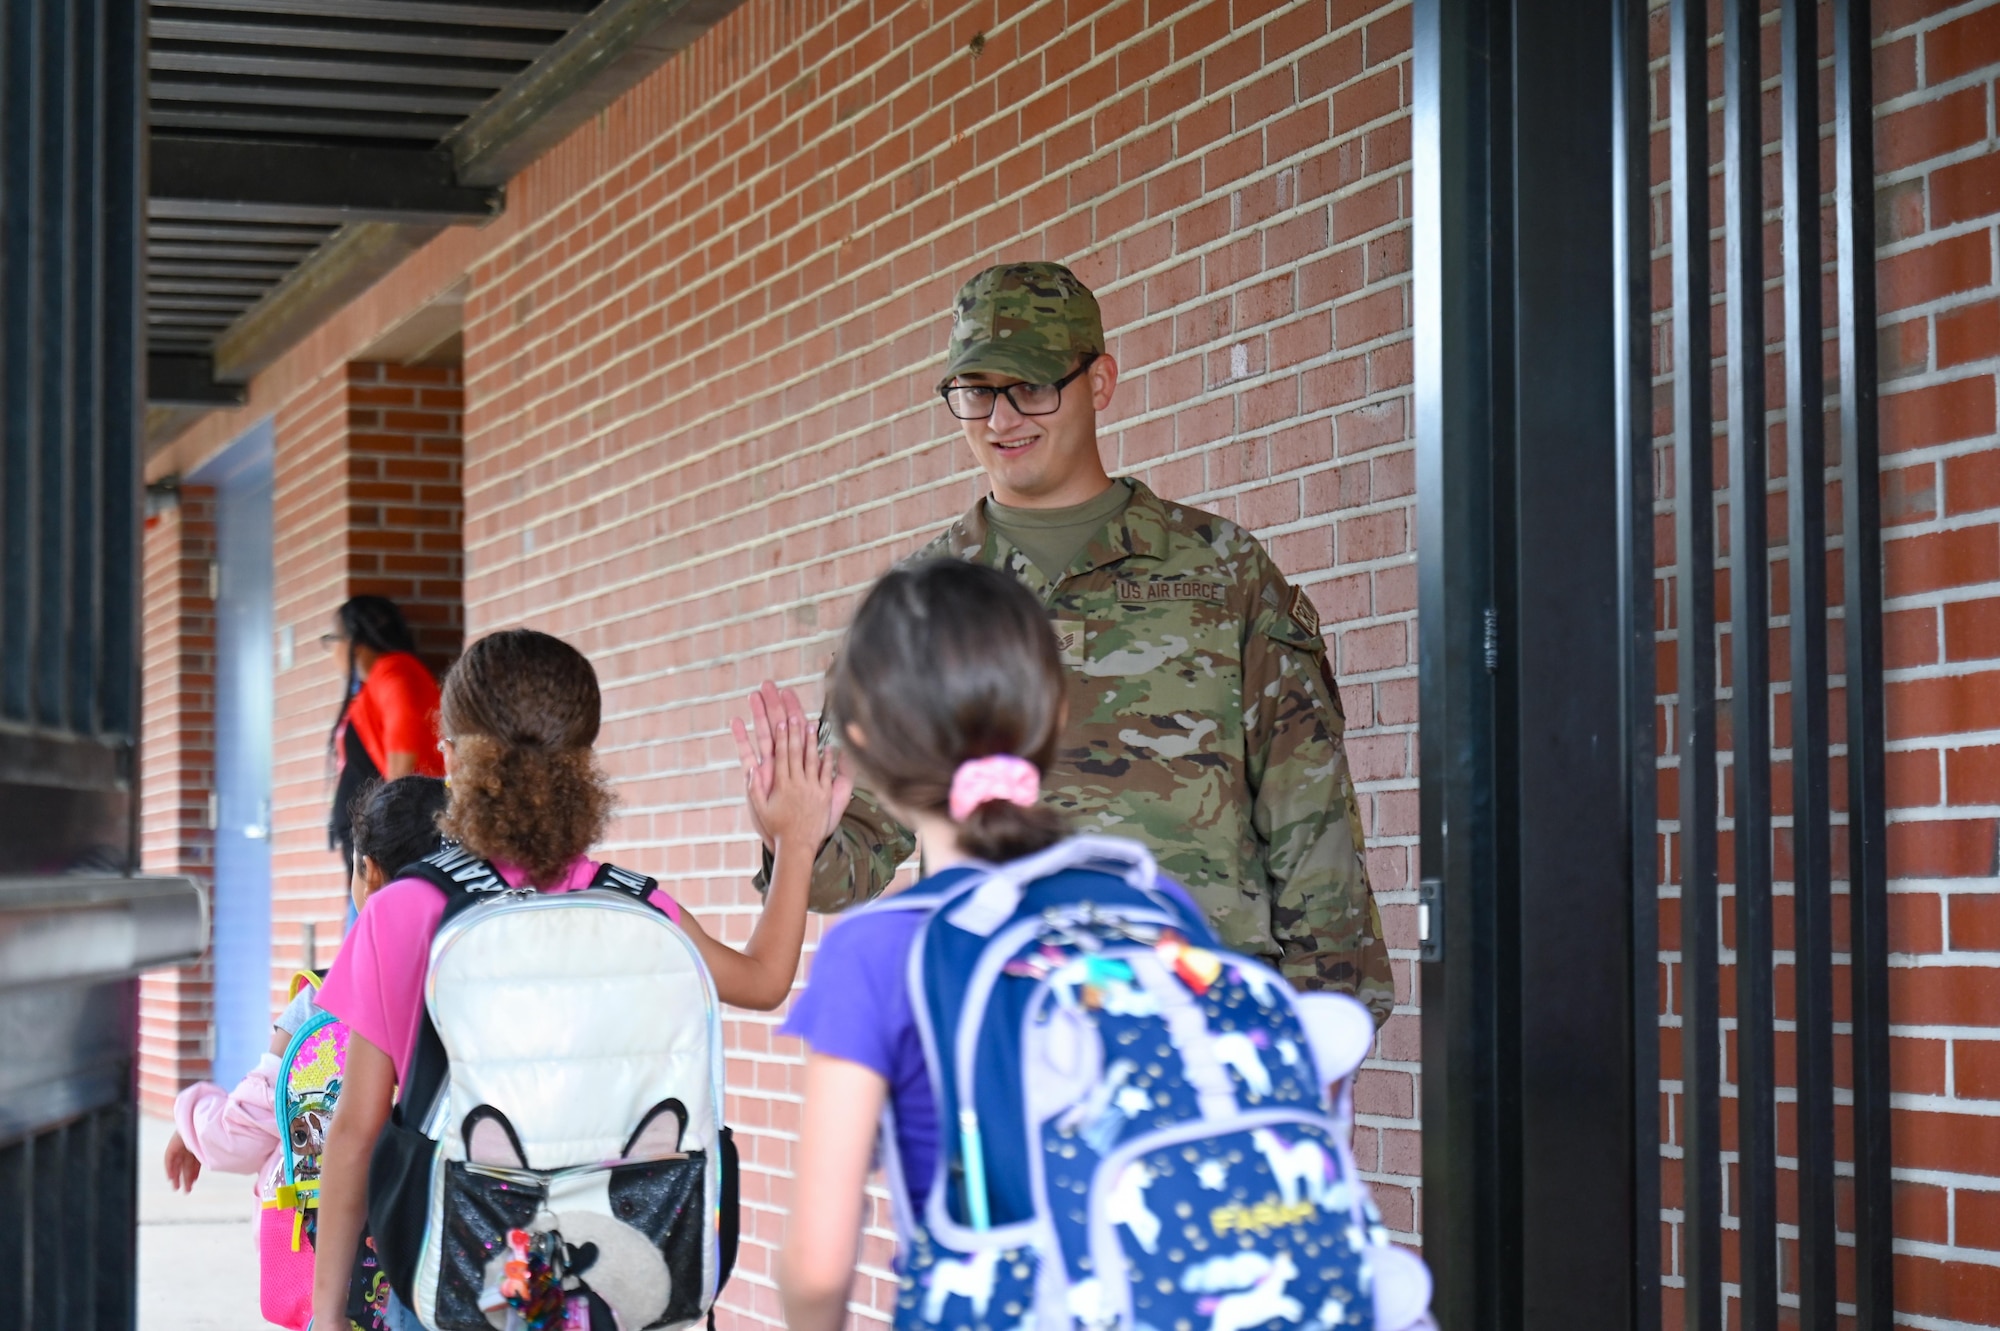 U.S. Air Force Staff Sgt. Adam Pickard, 87th Electronic Warfare Squadron, COMBAT SHIELD avionics electronic warfare journeyman, high fives school children on their way into school at Shalimar Elementary, Shalimar, Florida, April 29, 2024. The principal of Shalimar Elementary serves as the 87th EWS’ honorary commander, and invited Airmen to participate in the school’s Military Monday. (U.S. Air Force photo by Capt. Benjamin Aronson)